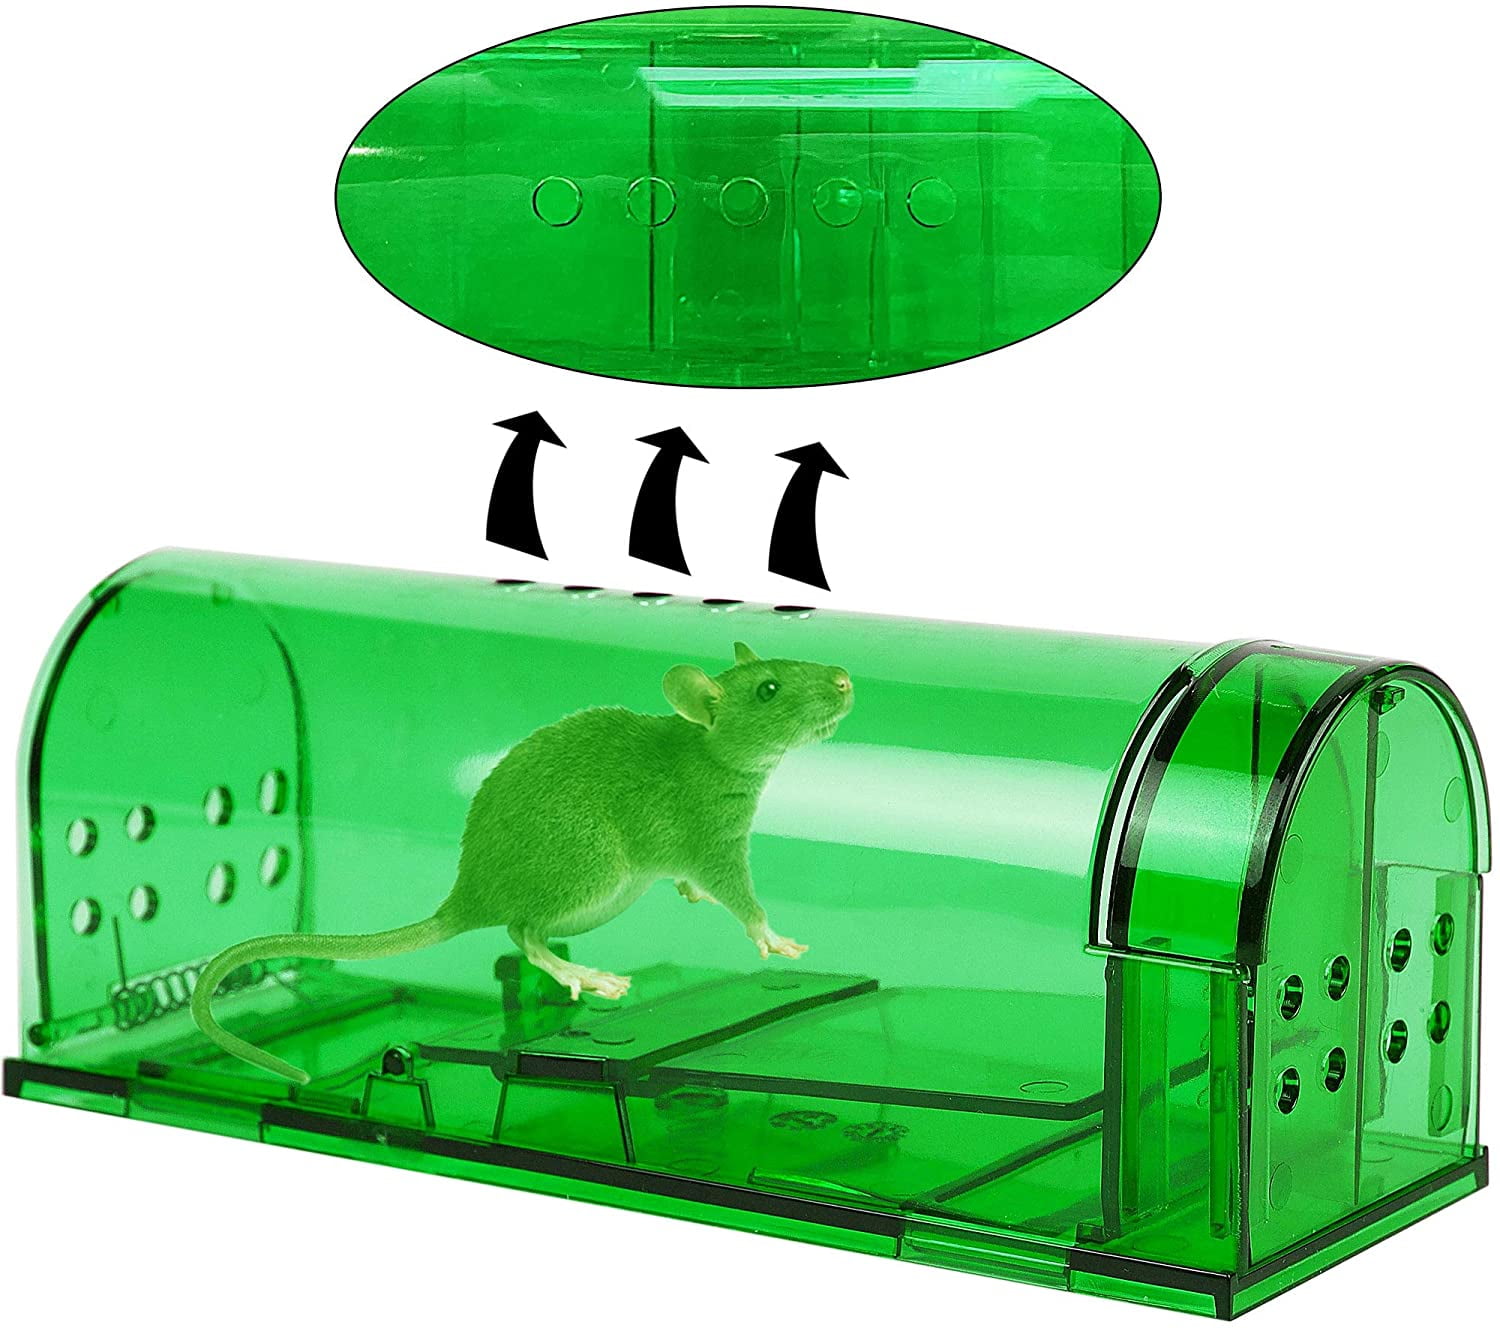 Humane Non-Lethal Mouse Trap in Beech Wood and Metal Catch and Release -  THE BEACH PLUM COMPANY